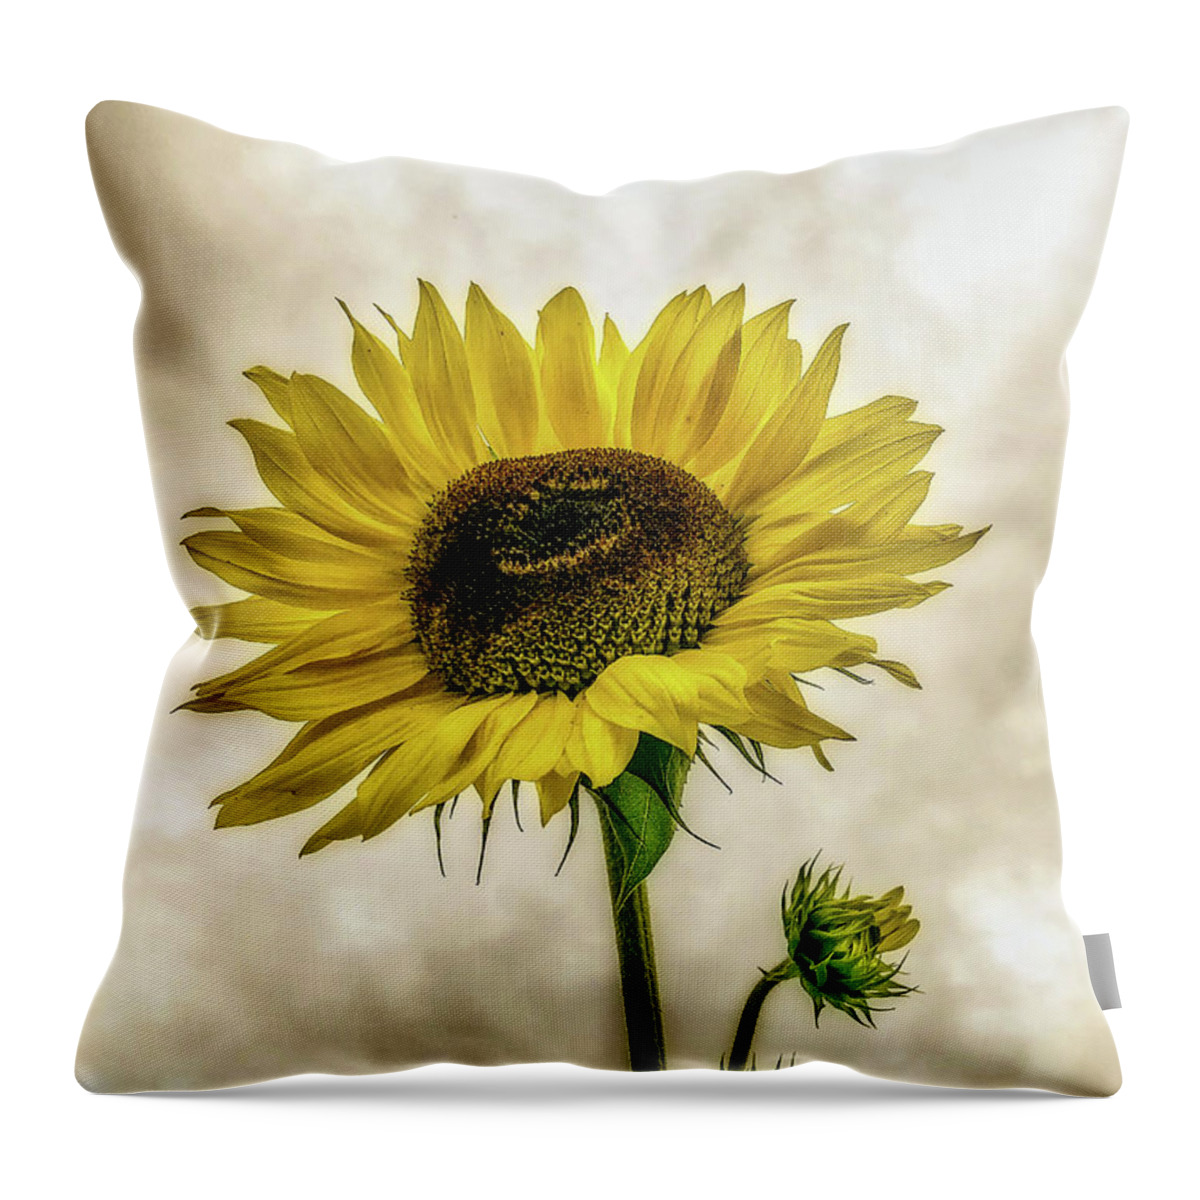 Sunflower Throw Pillow featuring the photograph Sunflower by Anamar Pictures